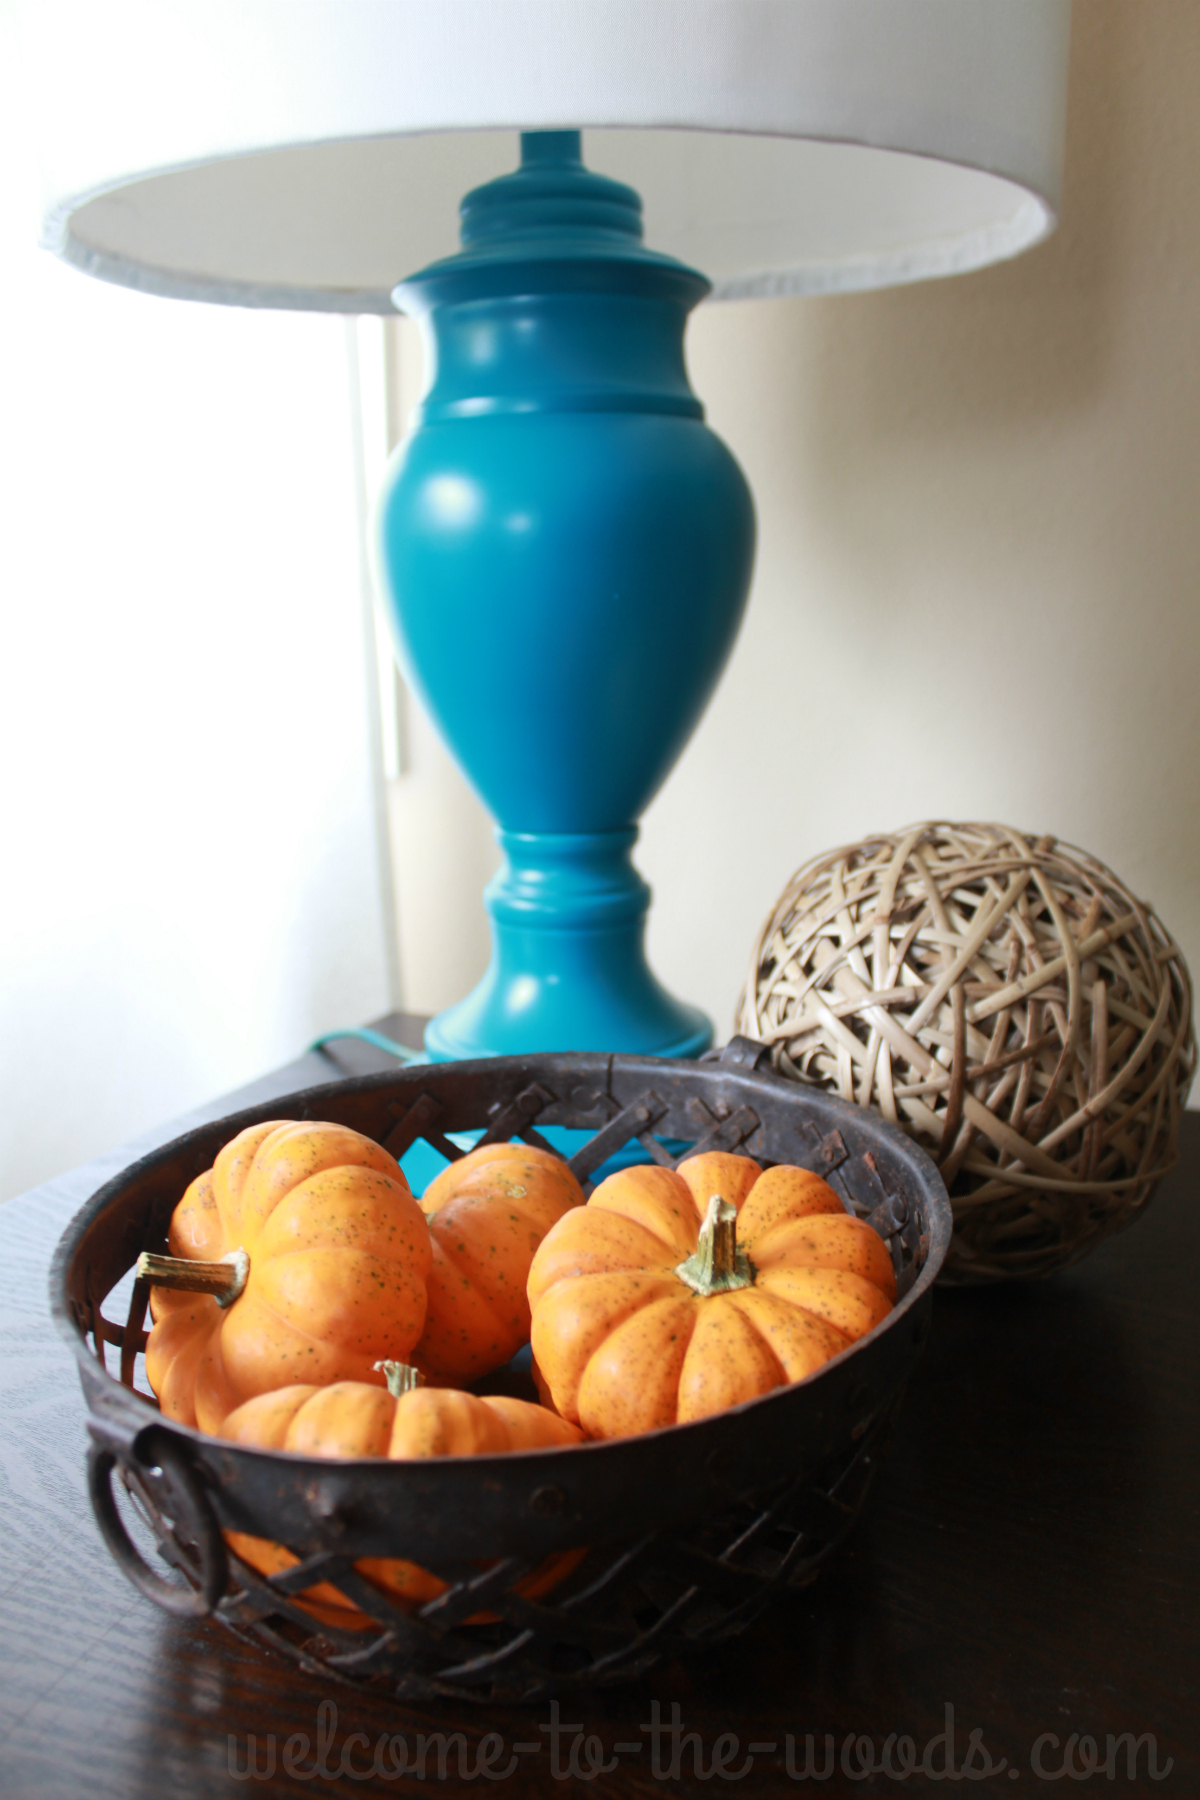 Decorate with mini pumpkins for autumn. Just throw some in a basket!